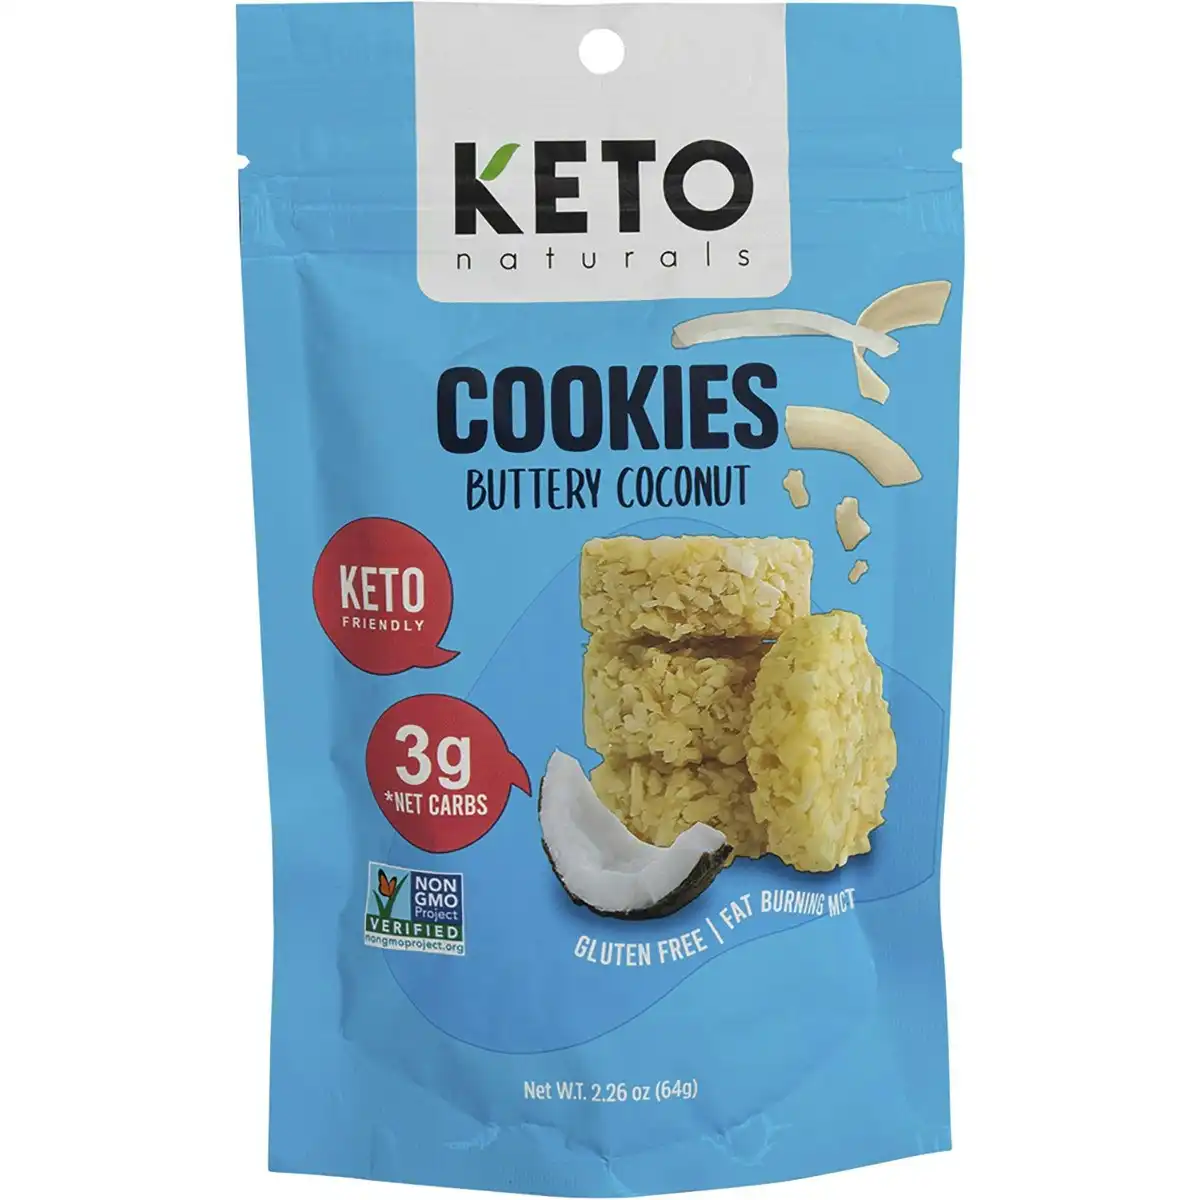 Keto Naturals Cookies Buttery Coconut 64g 8PK